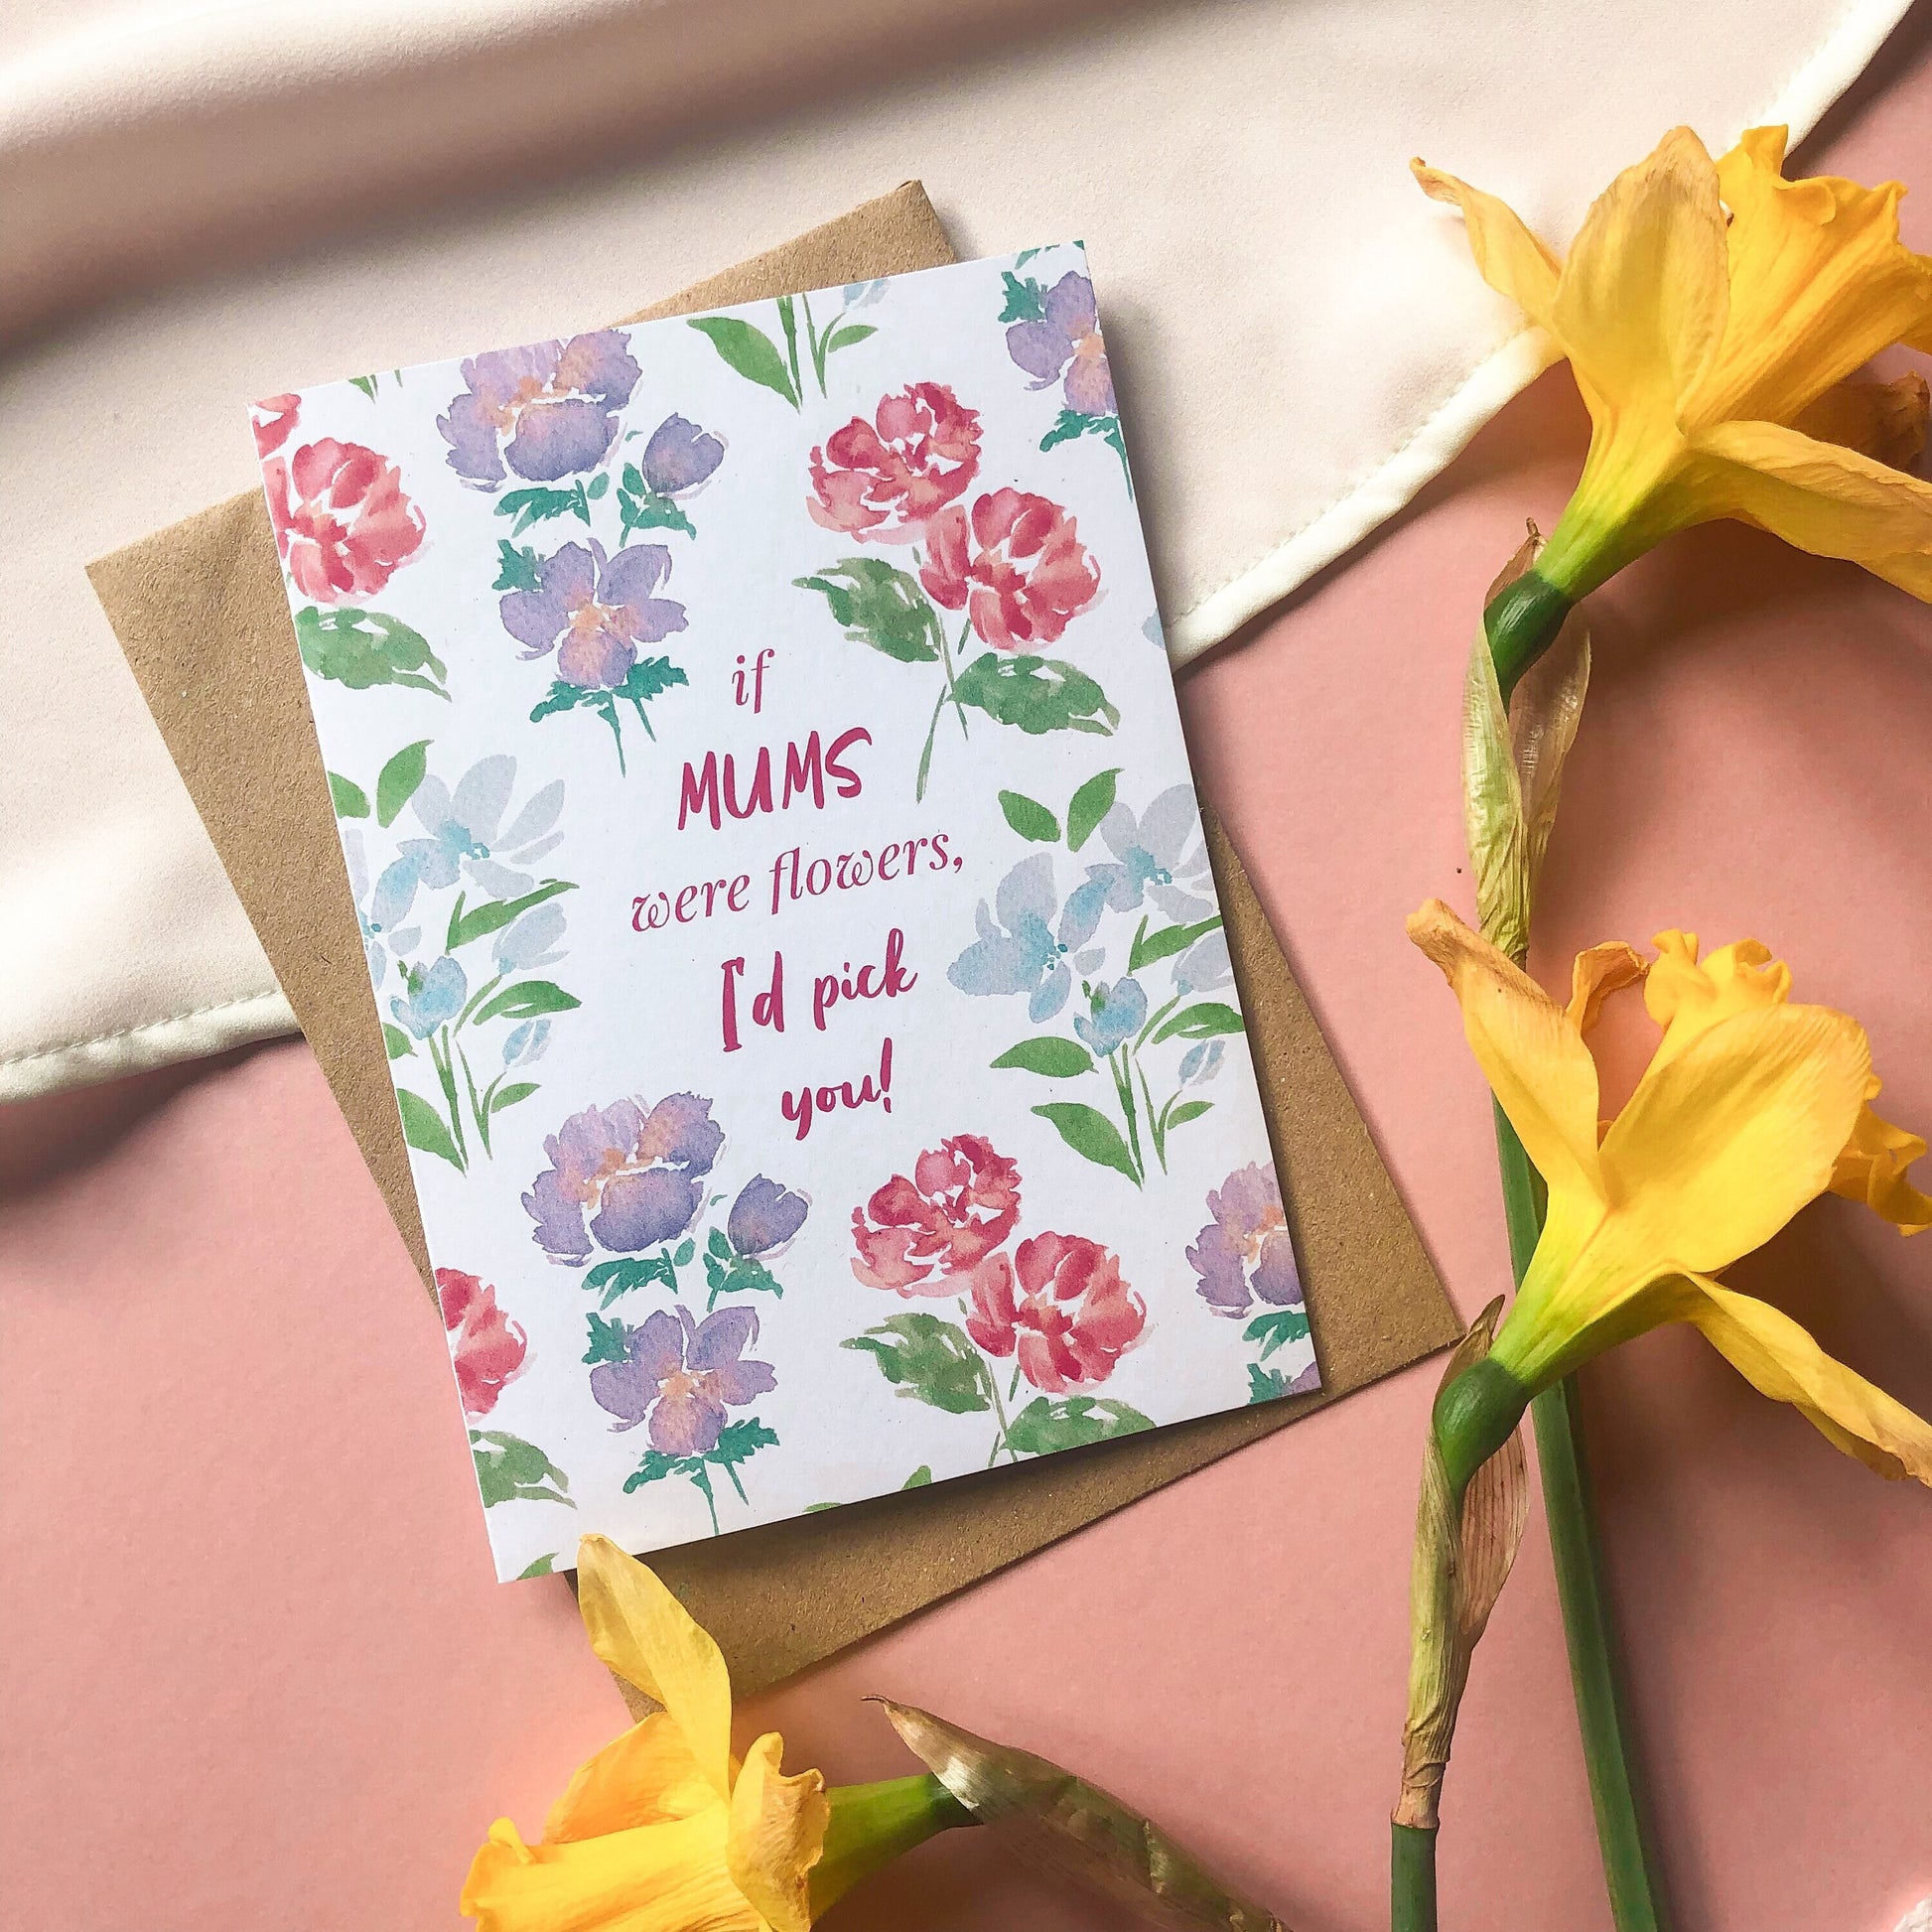 If Mums Were Flowers, I'd Pick You Mother's Day Card A6 Floral Card for Mum, Step Mum - Hand Painted Watercolour Gift Eco Friendly